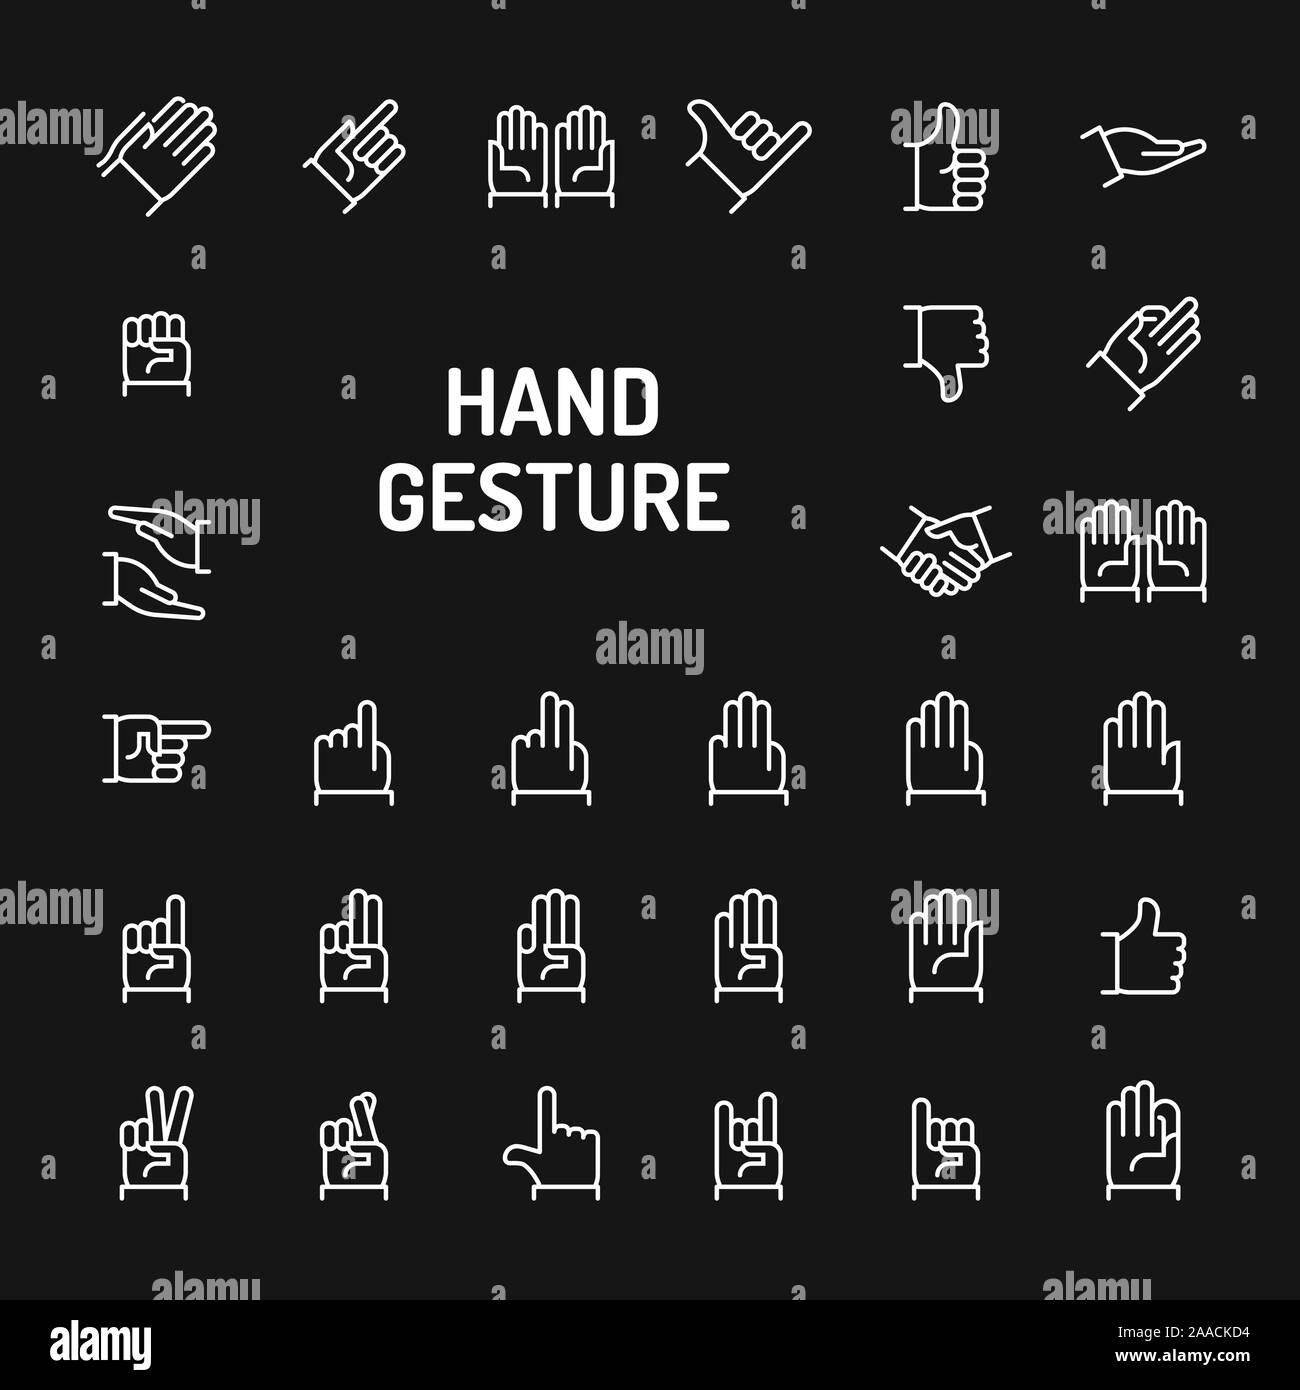 Simple white line icons isolated over black background related to hand gestures and actions. Vector signs and symbols collections for website and desi Stock Vector